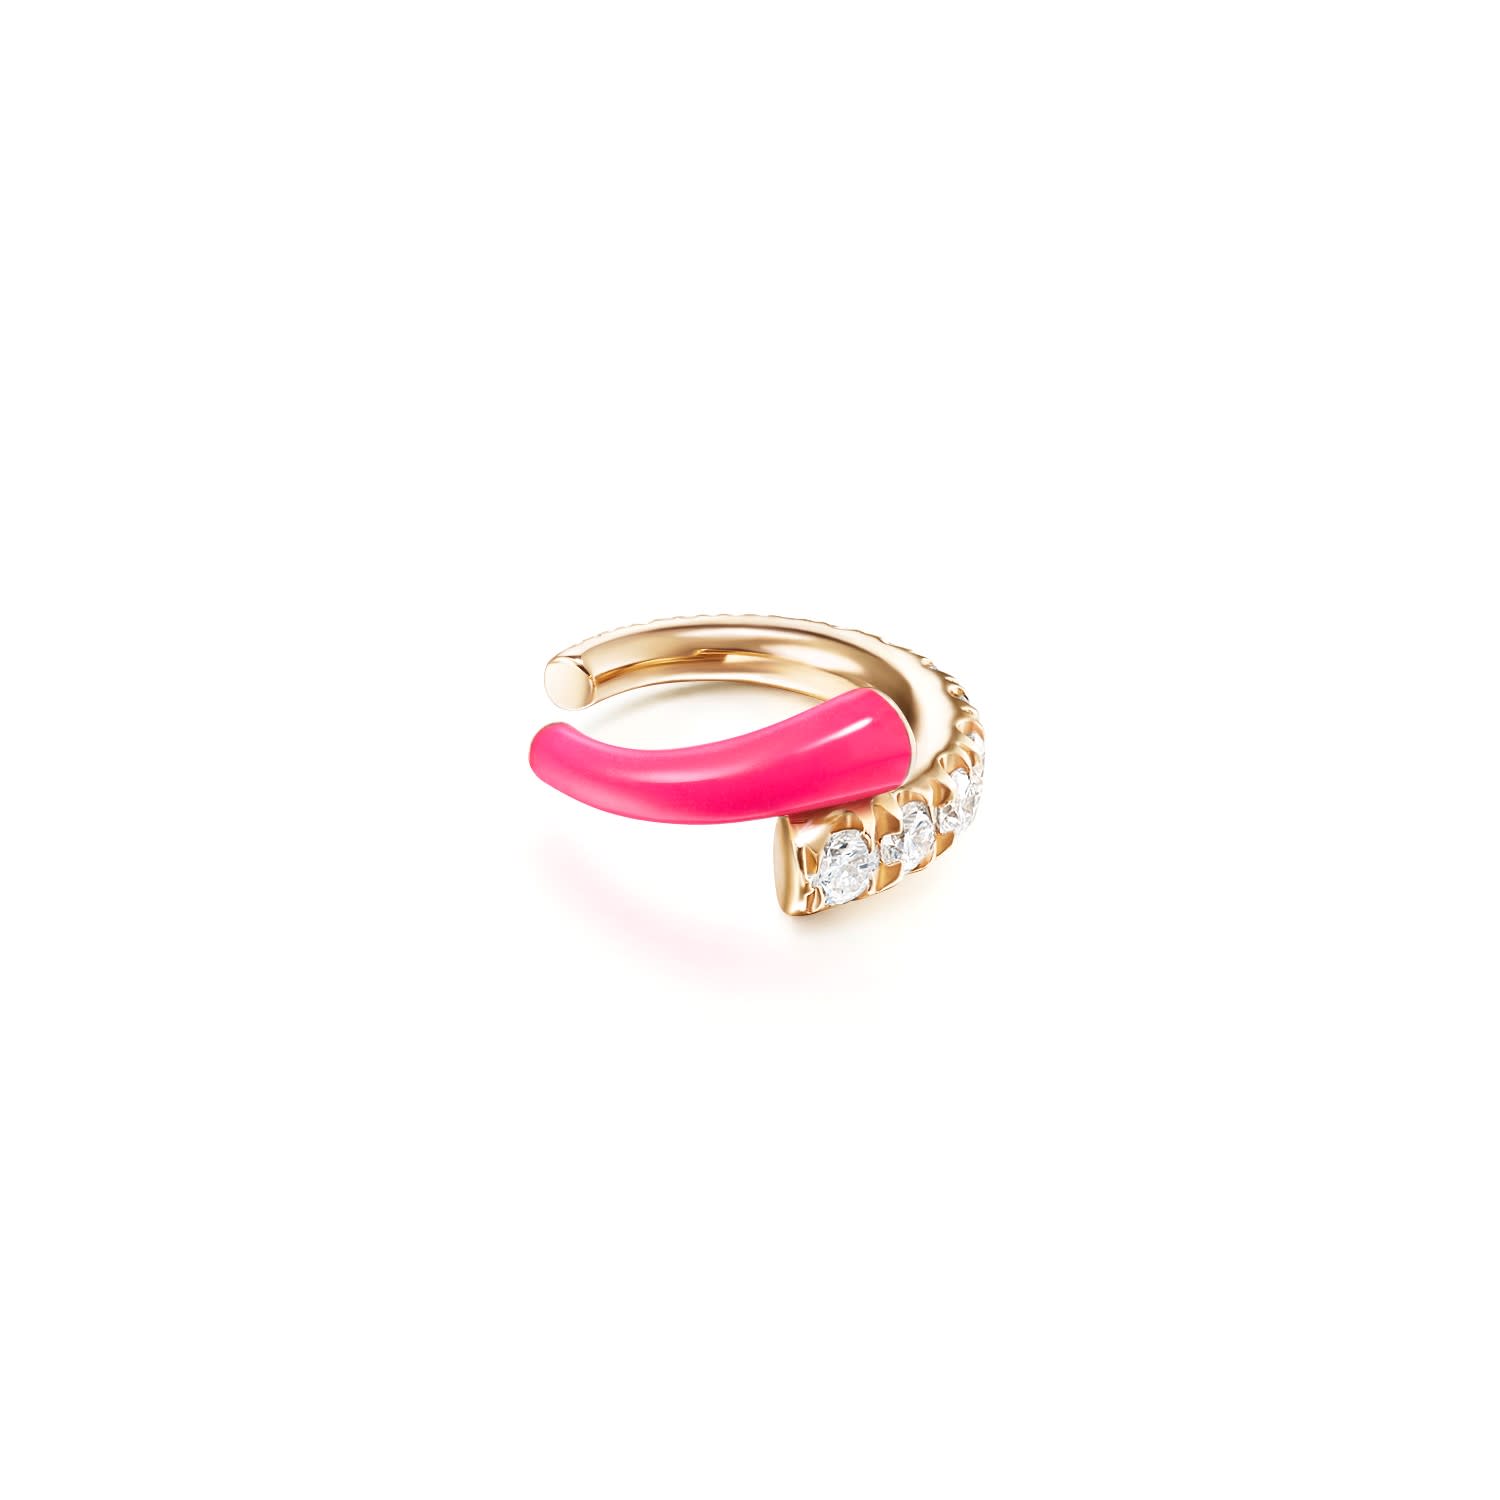 (Single) Lola Ear Cuff in 18K Rose Gold with Neon Pink Enamel and Diamonds